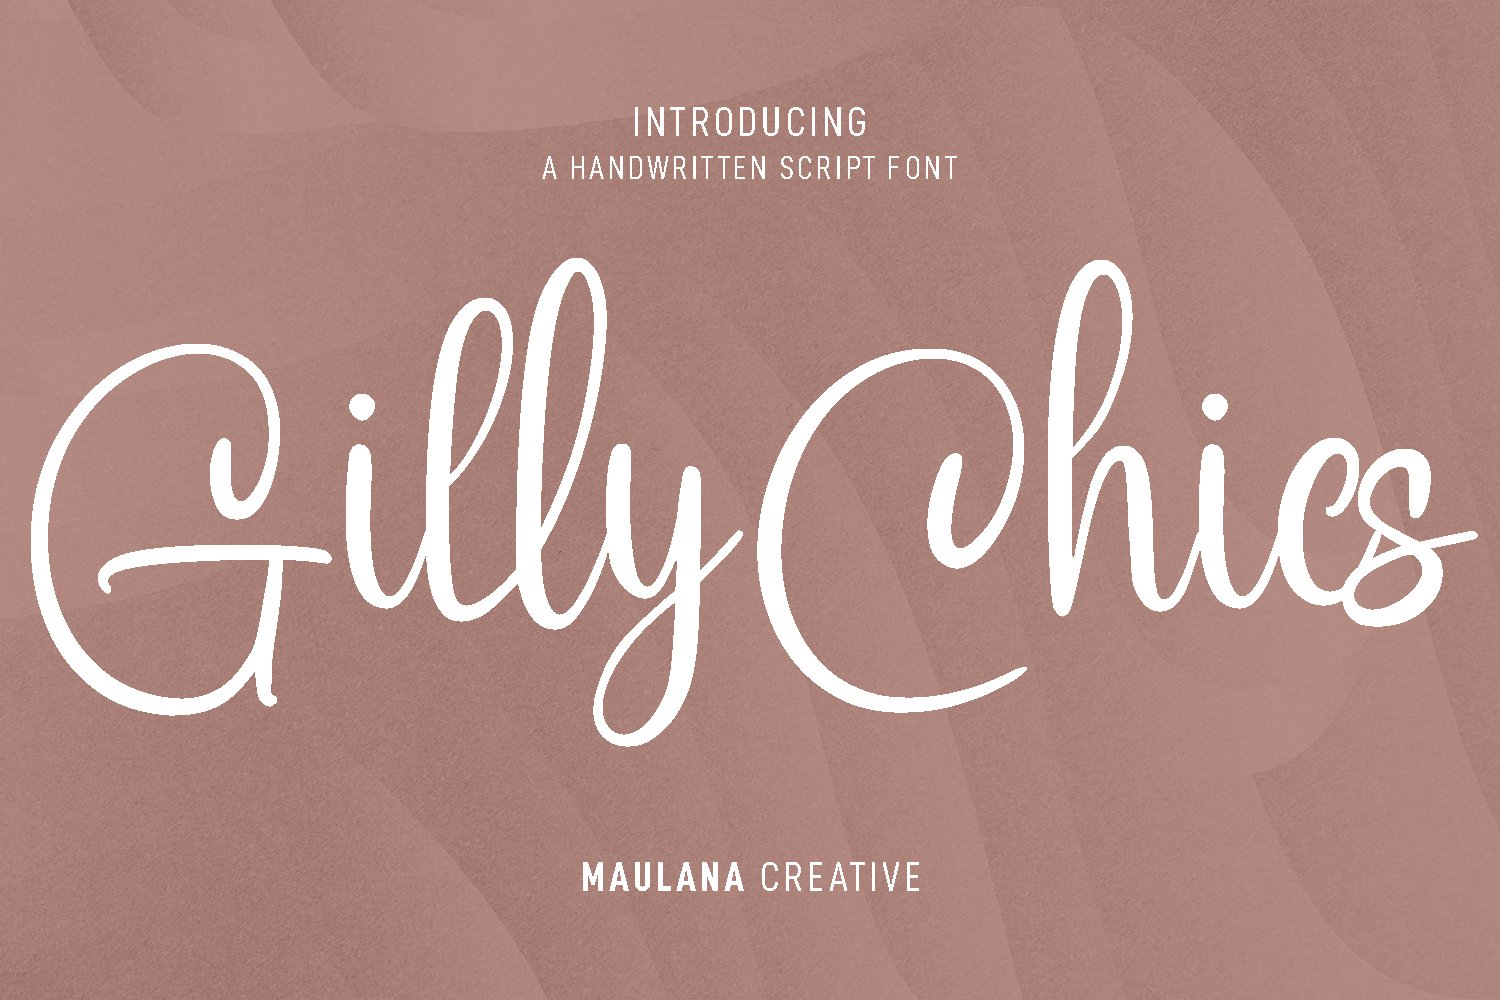 Gilly Chics Handwritten Script Font cover image.